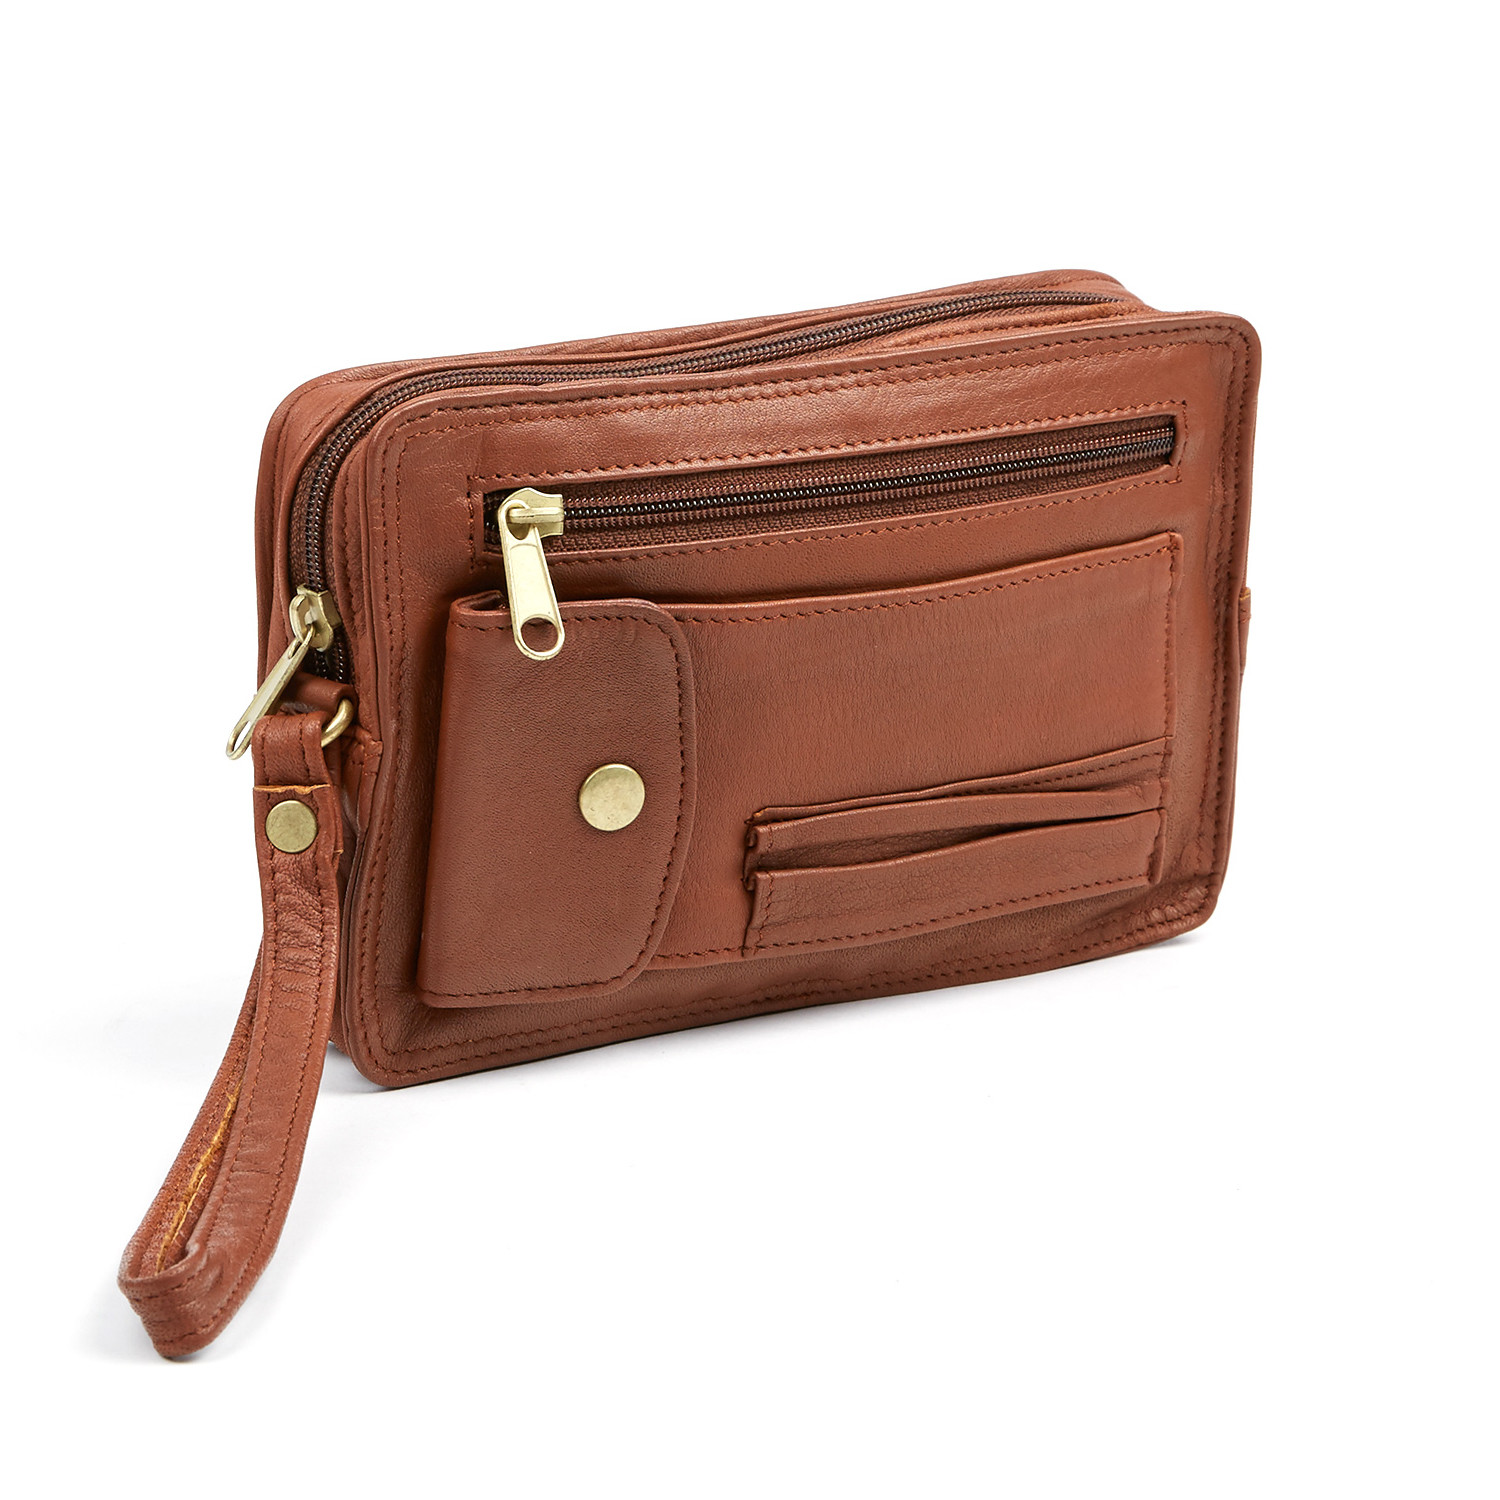 Small Leather Organizer Bag // Tan - Tanners Avenue - Touch of Modern